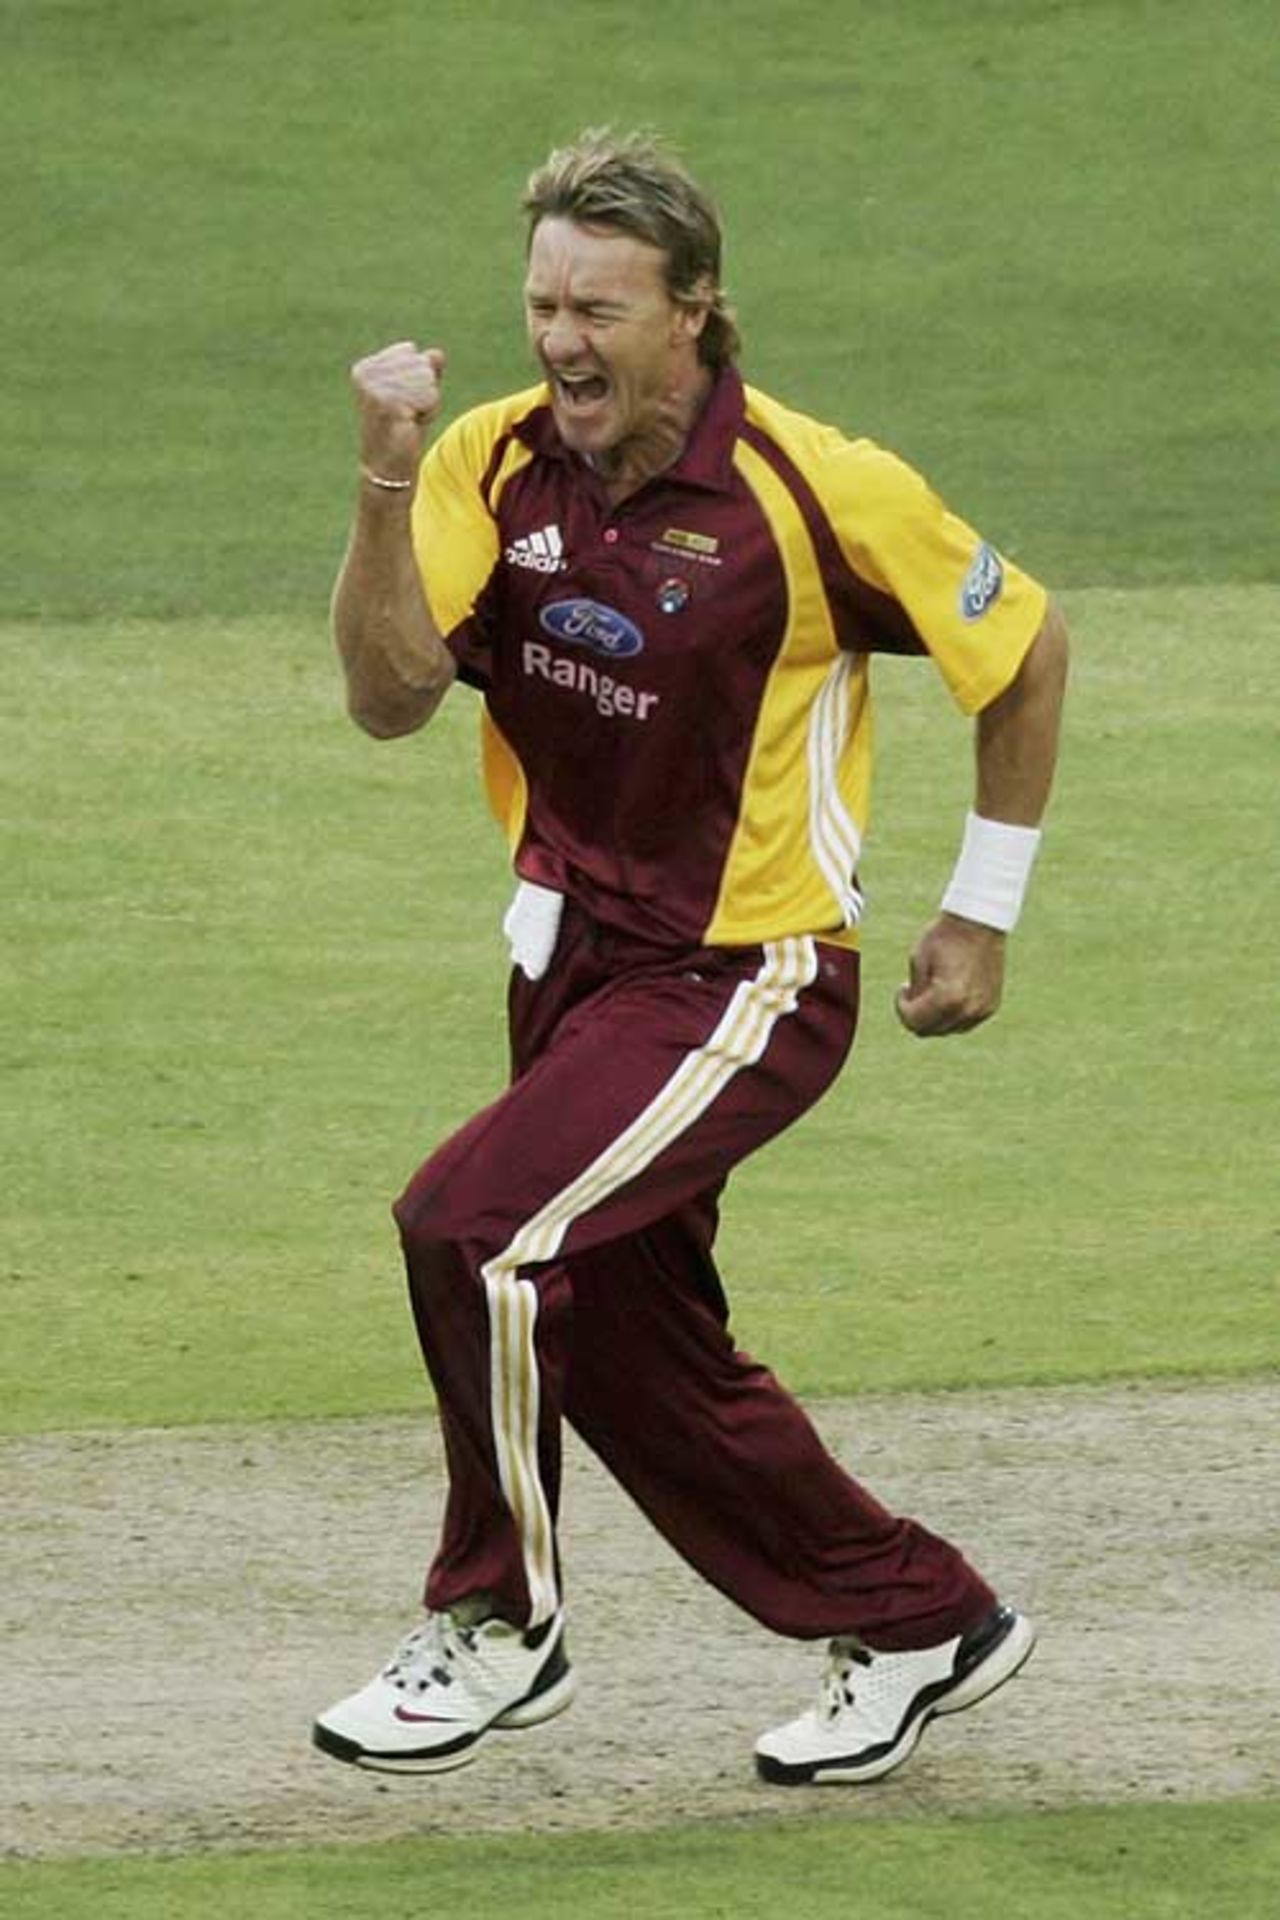 Andy Bichel celebrates as his wickets push Queensland towards the FR Cup title, Victoria v Queensland, Ford Ranger Cup final, Melbourne, February 25, 2007